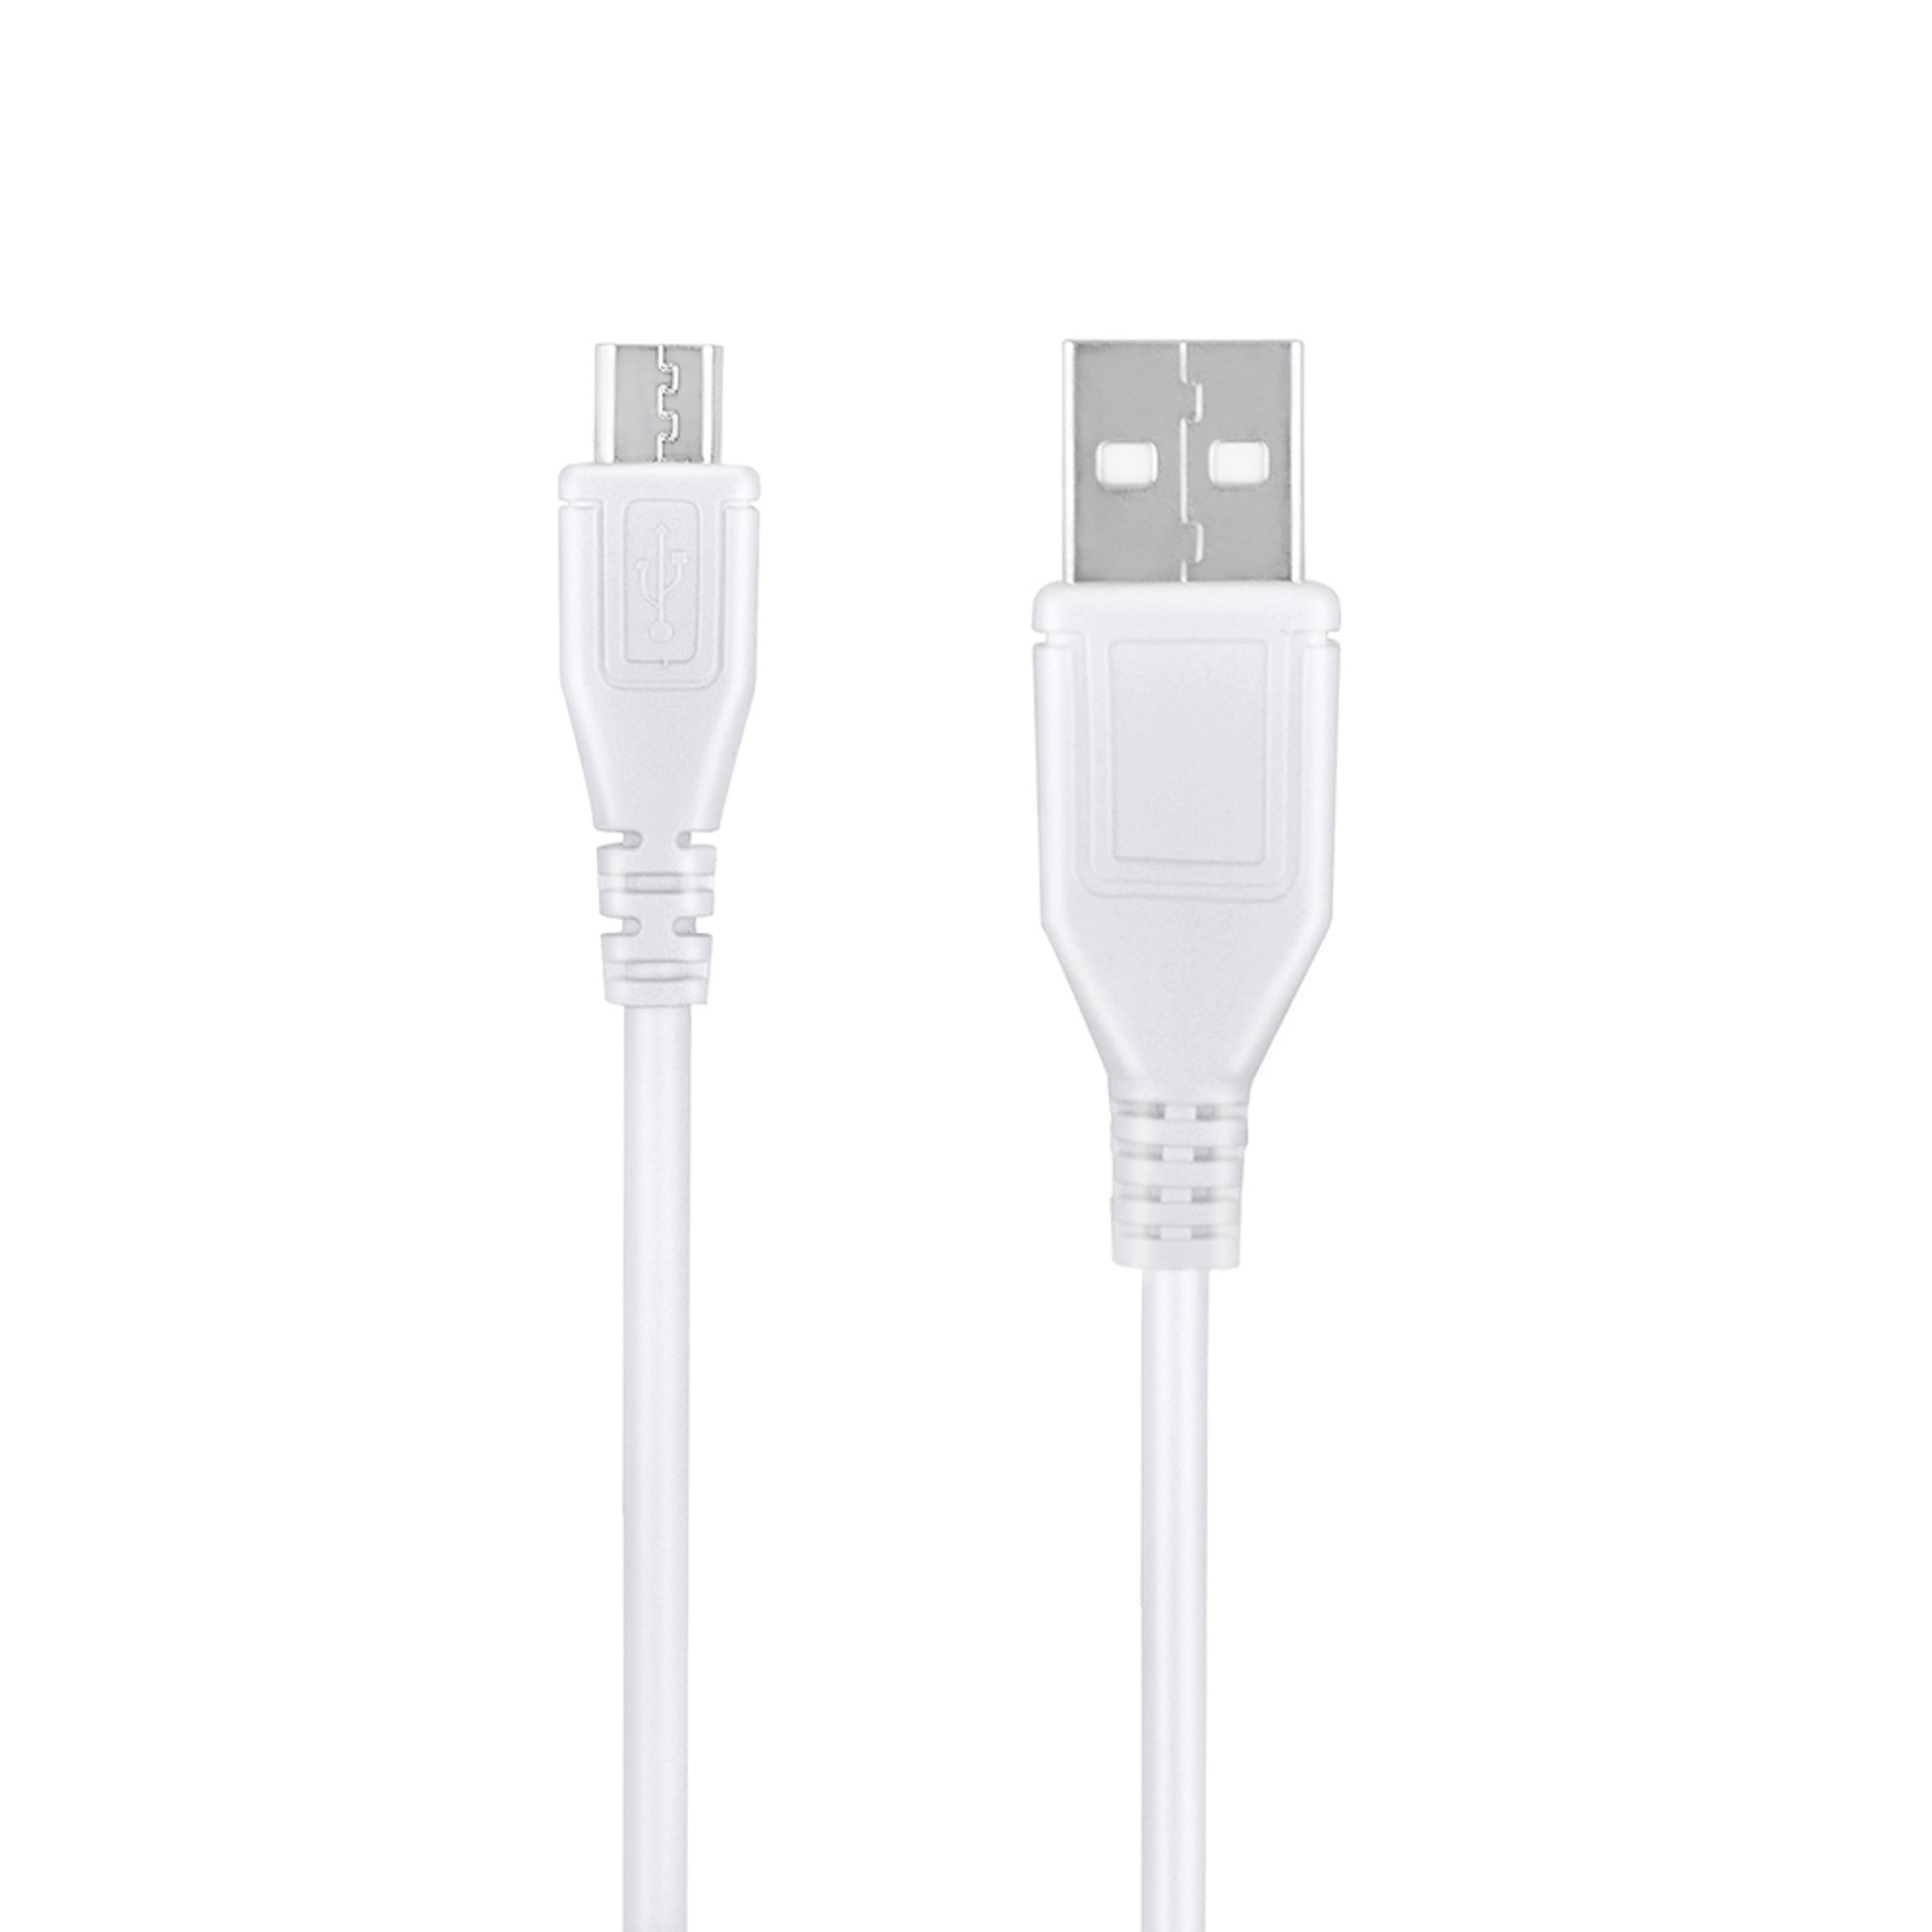 2x USB POWER CHARGING CABLE Cord for SONY DSC-HX80 DSC-HX90 DSC-HX200 DSC-HX300 